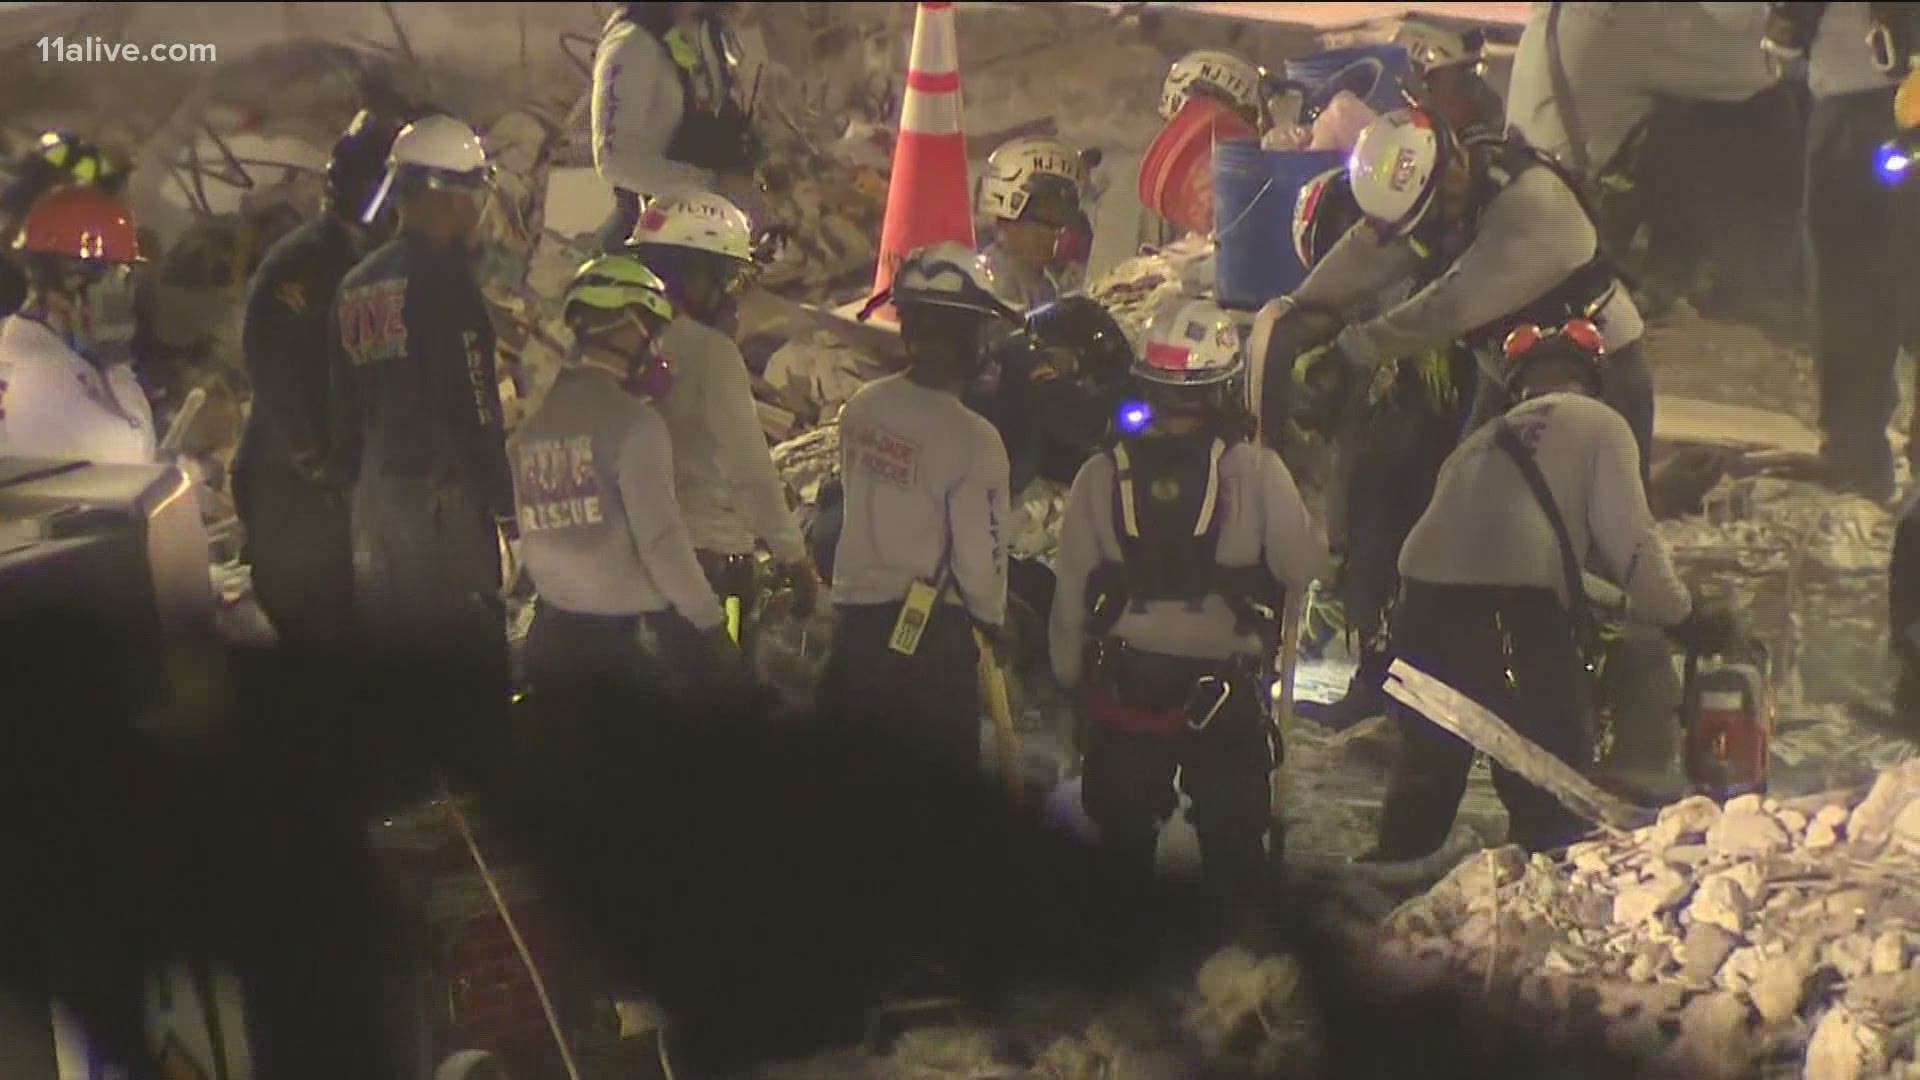 There are at least 14 people still missing in the rubble.